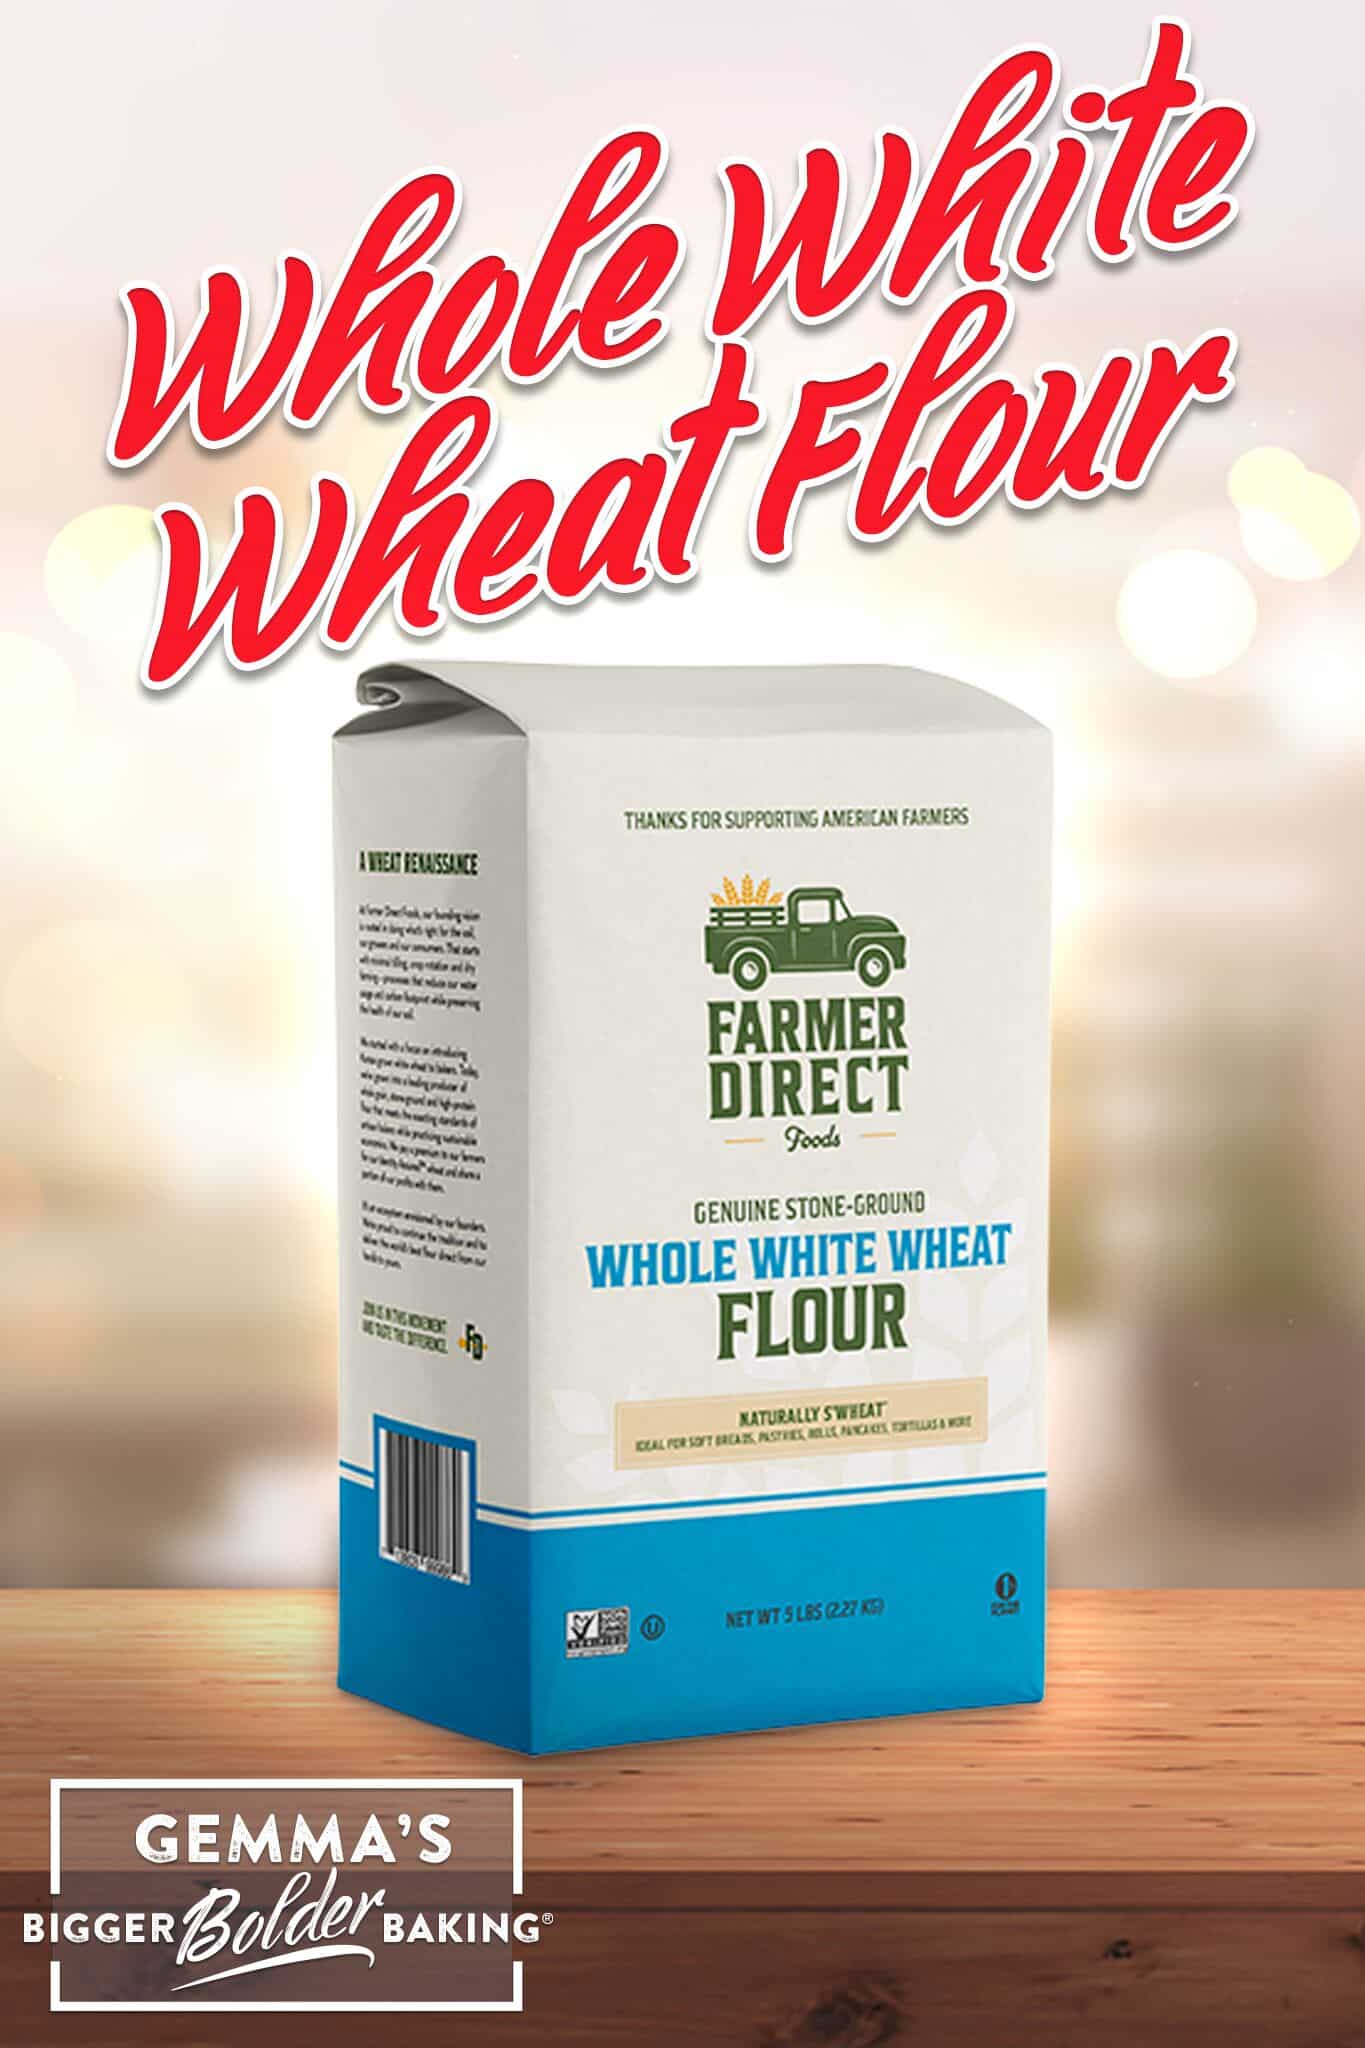 Ultimate Guide to 10 Types of Flour for Baking: Whole White Wheat Flour: 1)protein content 10%-12%, 2)whole grain with a mild, sweet flavor, light color, and soft texture 3)Best uses: yeasted breads, tortillas, pizza dough, pancakes and muffins